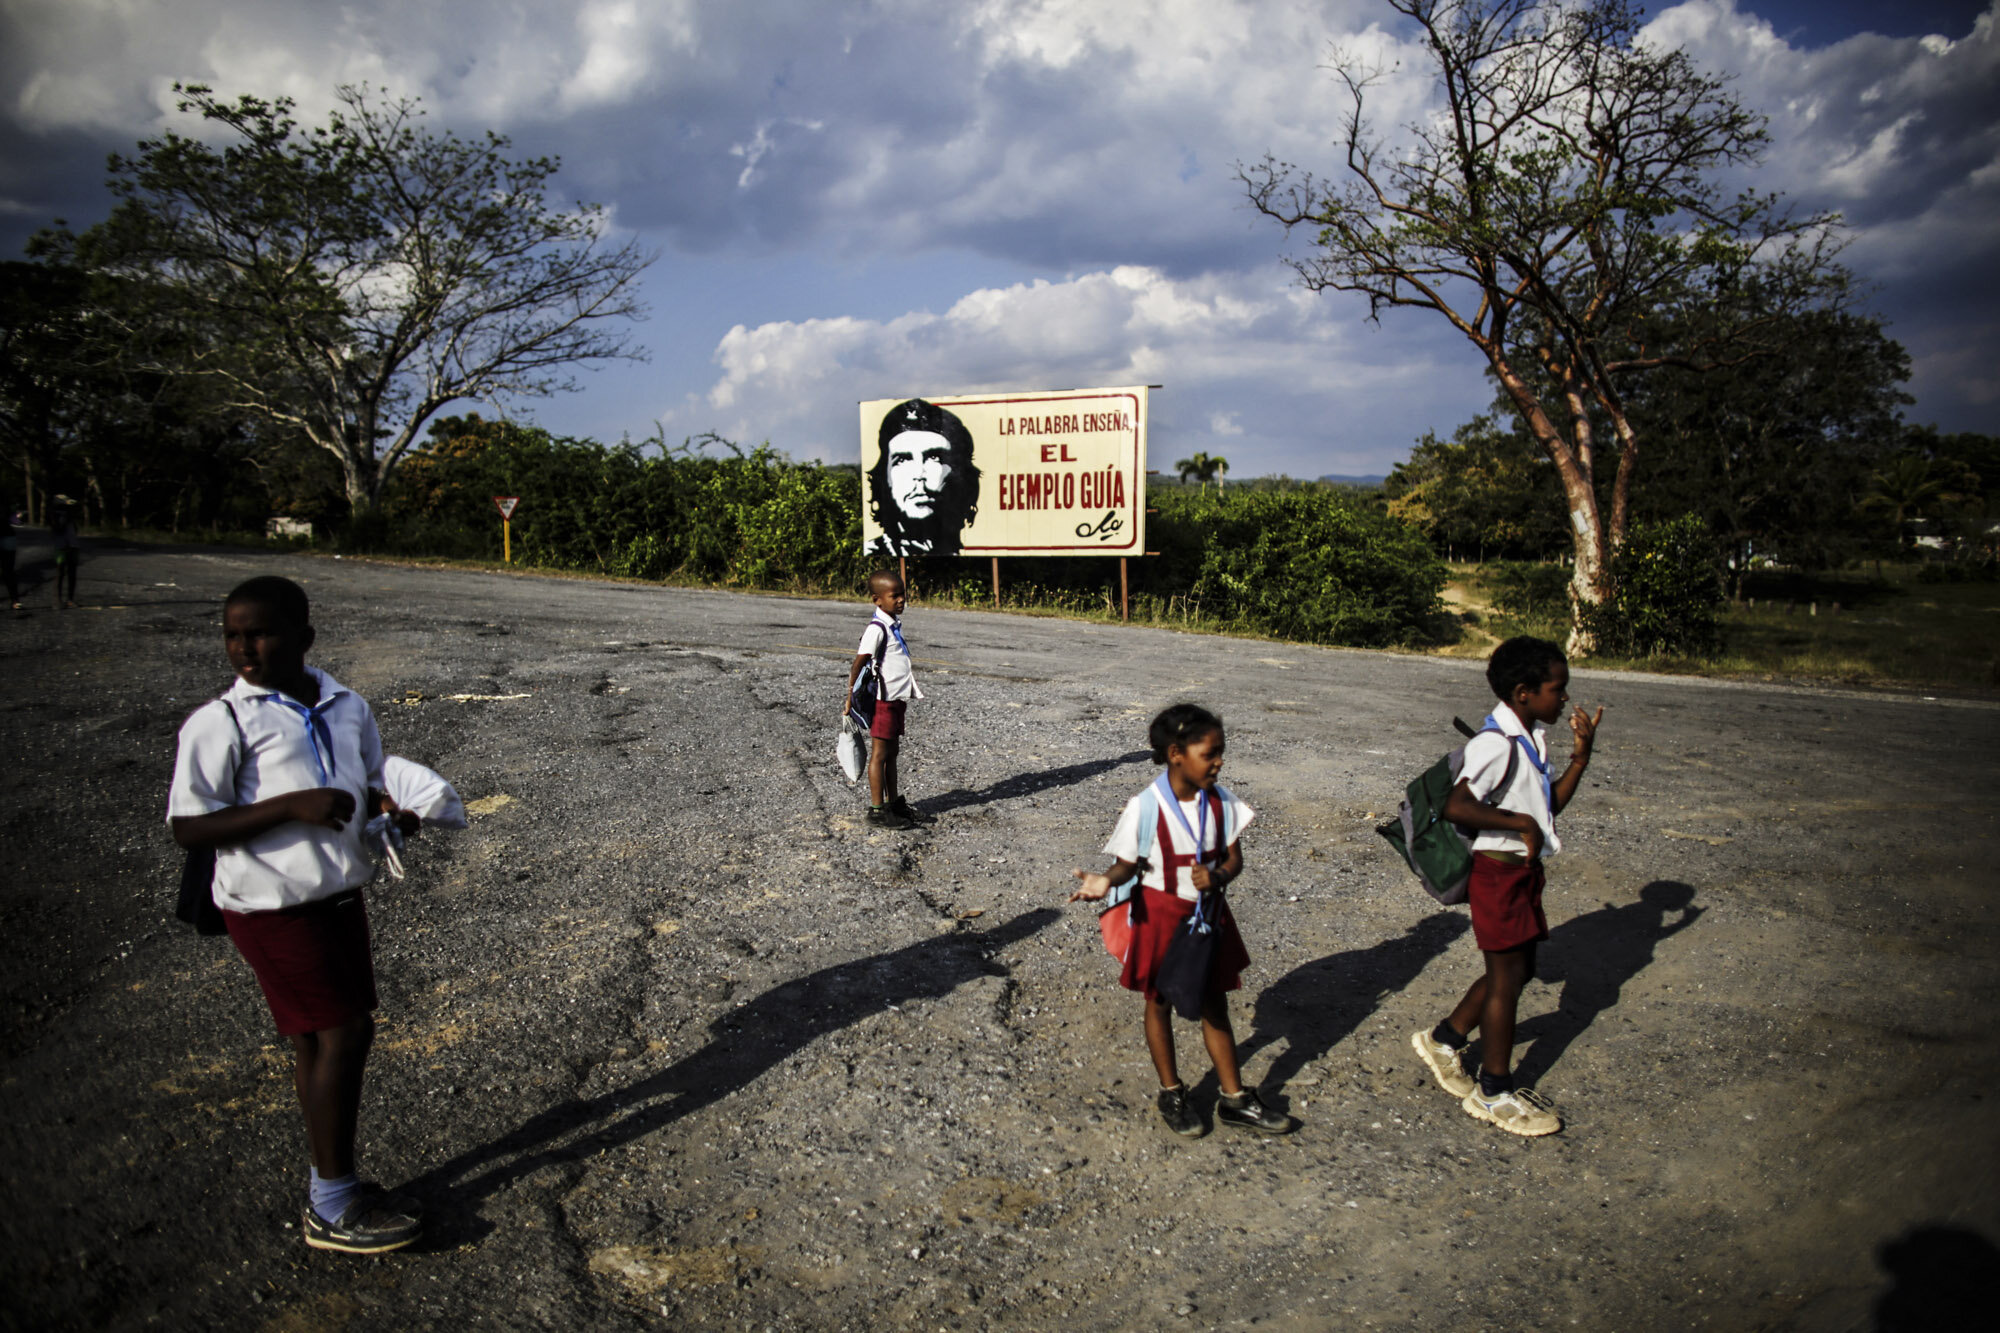  Cuban pioneers pass by a billboard with the image of Che Guevara on their way back home after school, on the road to Vinales, Pinar del Rio, 2014. 